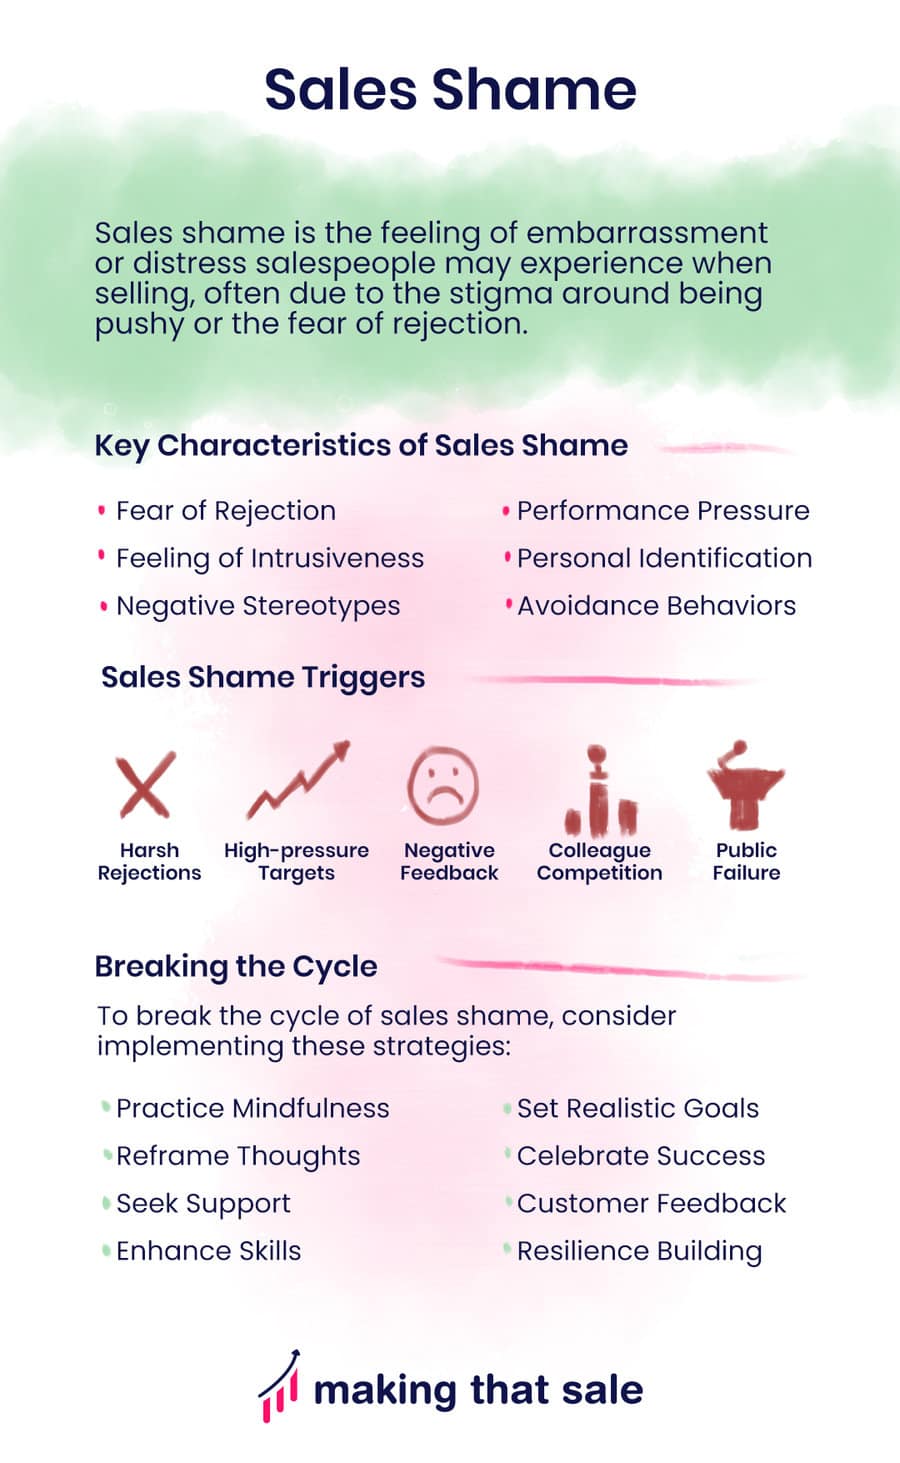 Sales Shame Characteristics, triggers and breaking the cycle